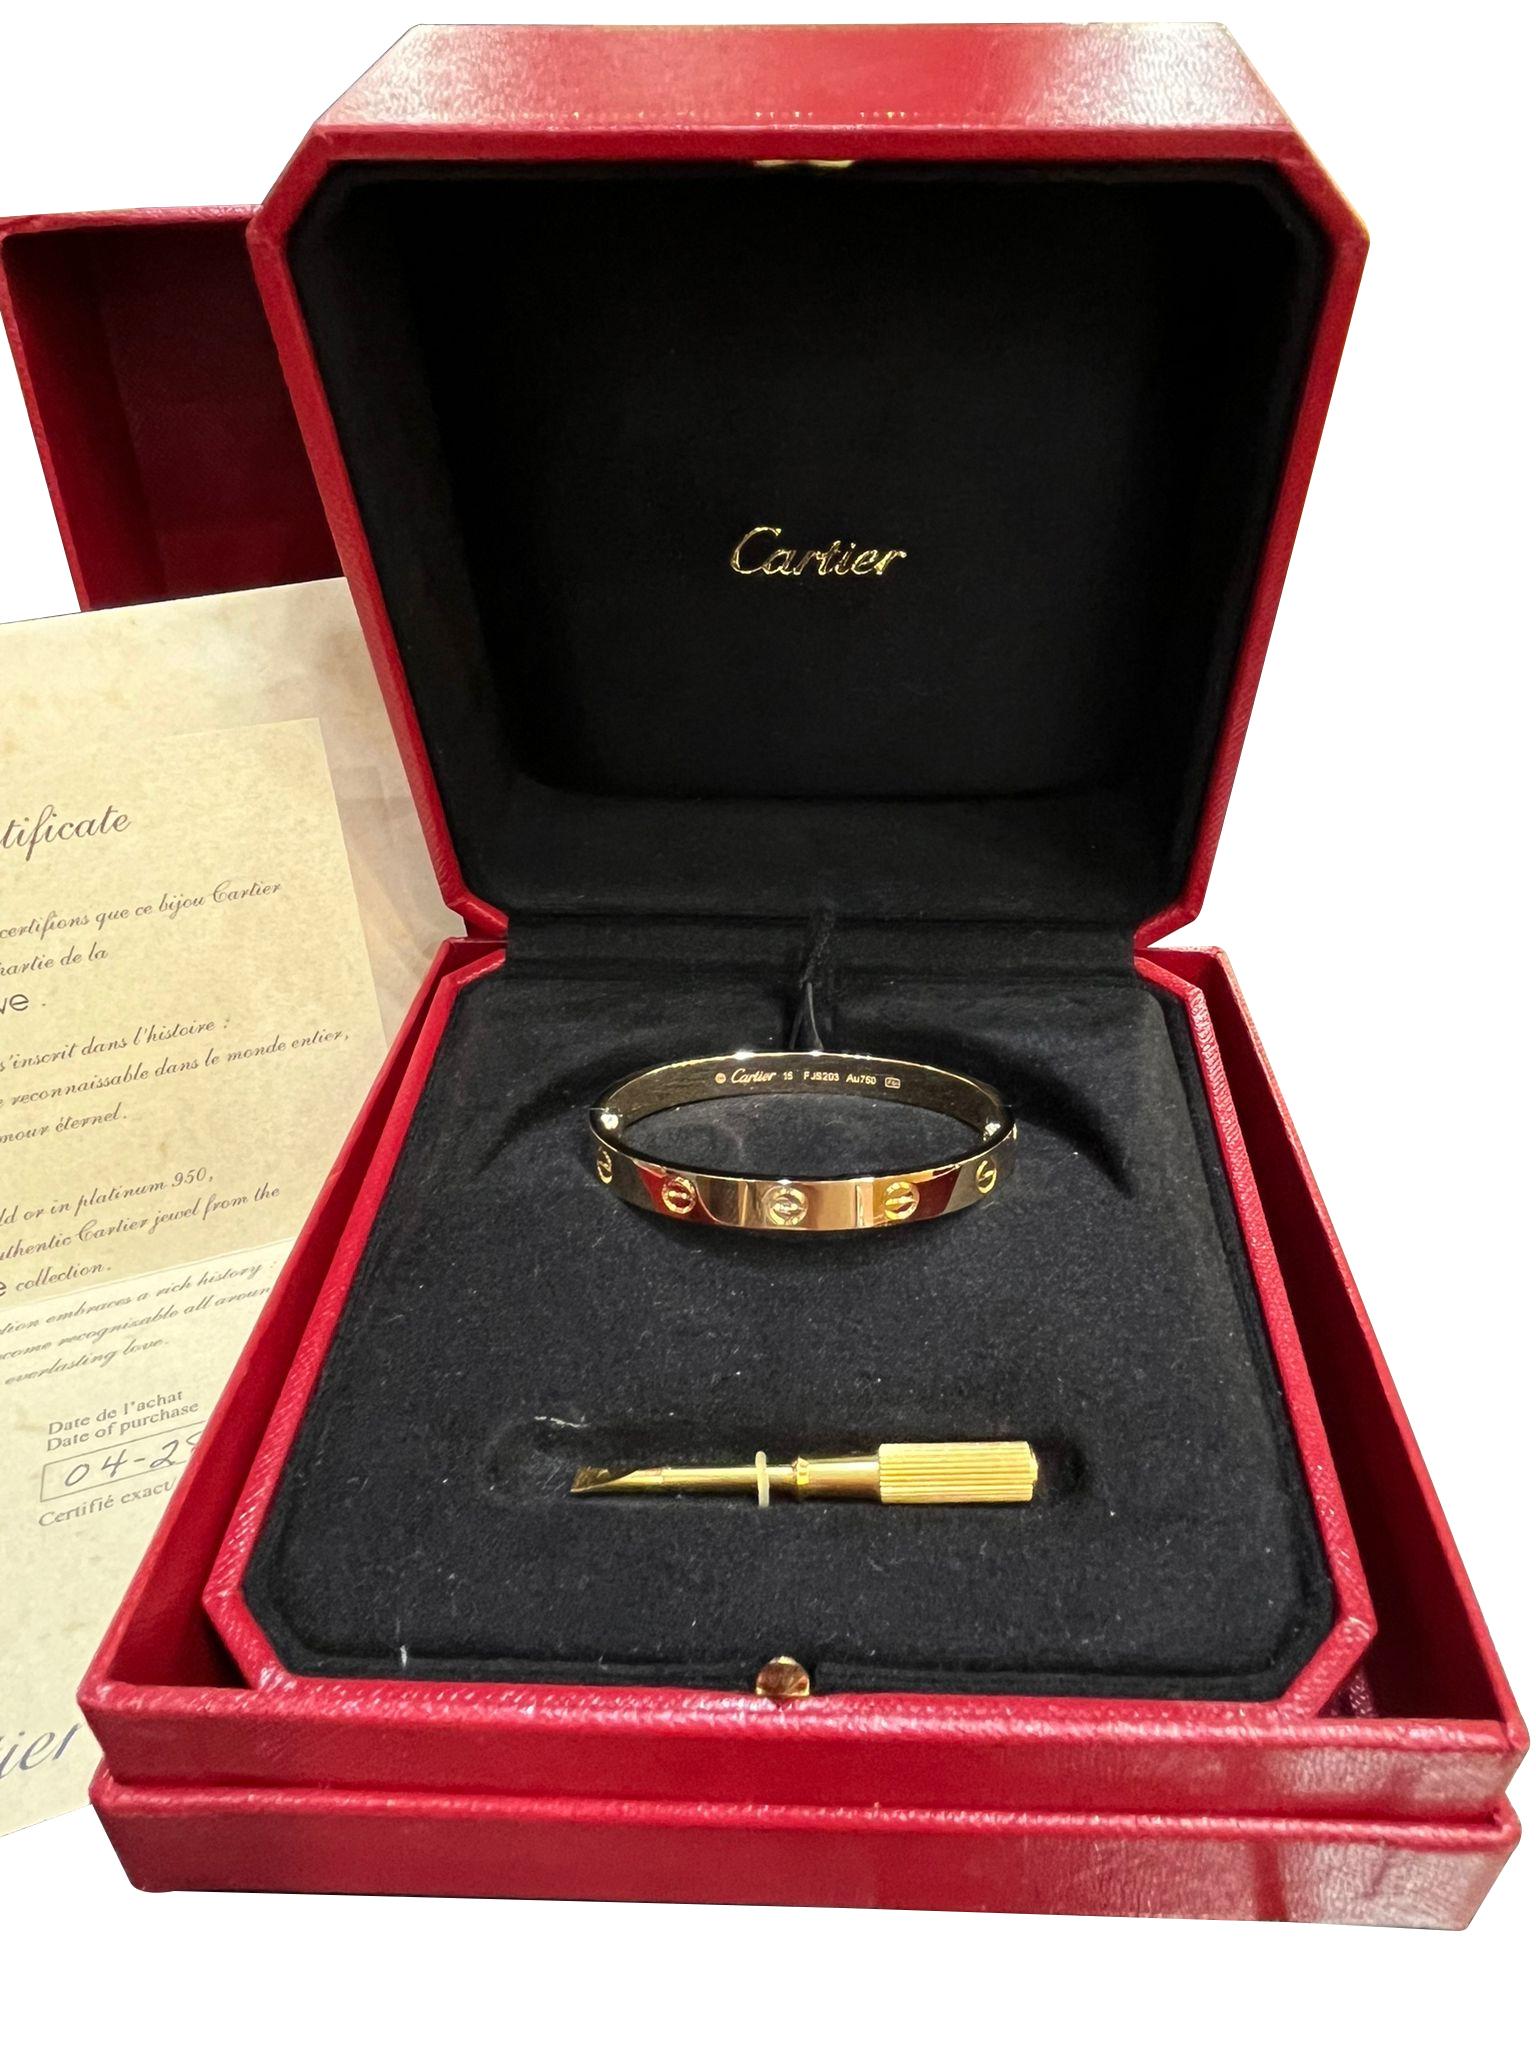 Cartier Love Bracelet 18K Yellow Gold Size 15 Brushed Finish with Screwdriver For Sale 3